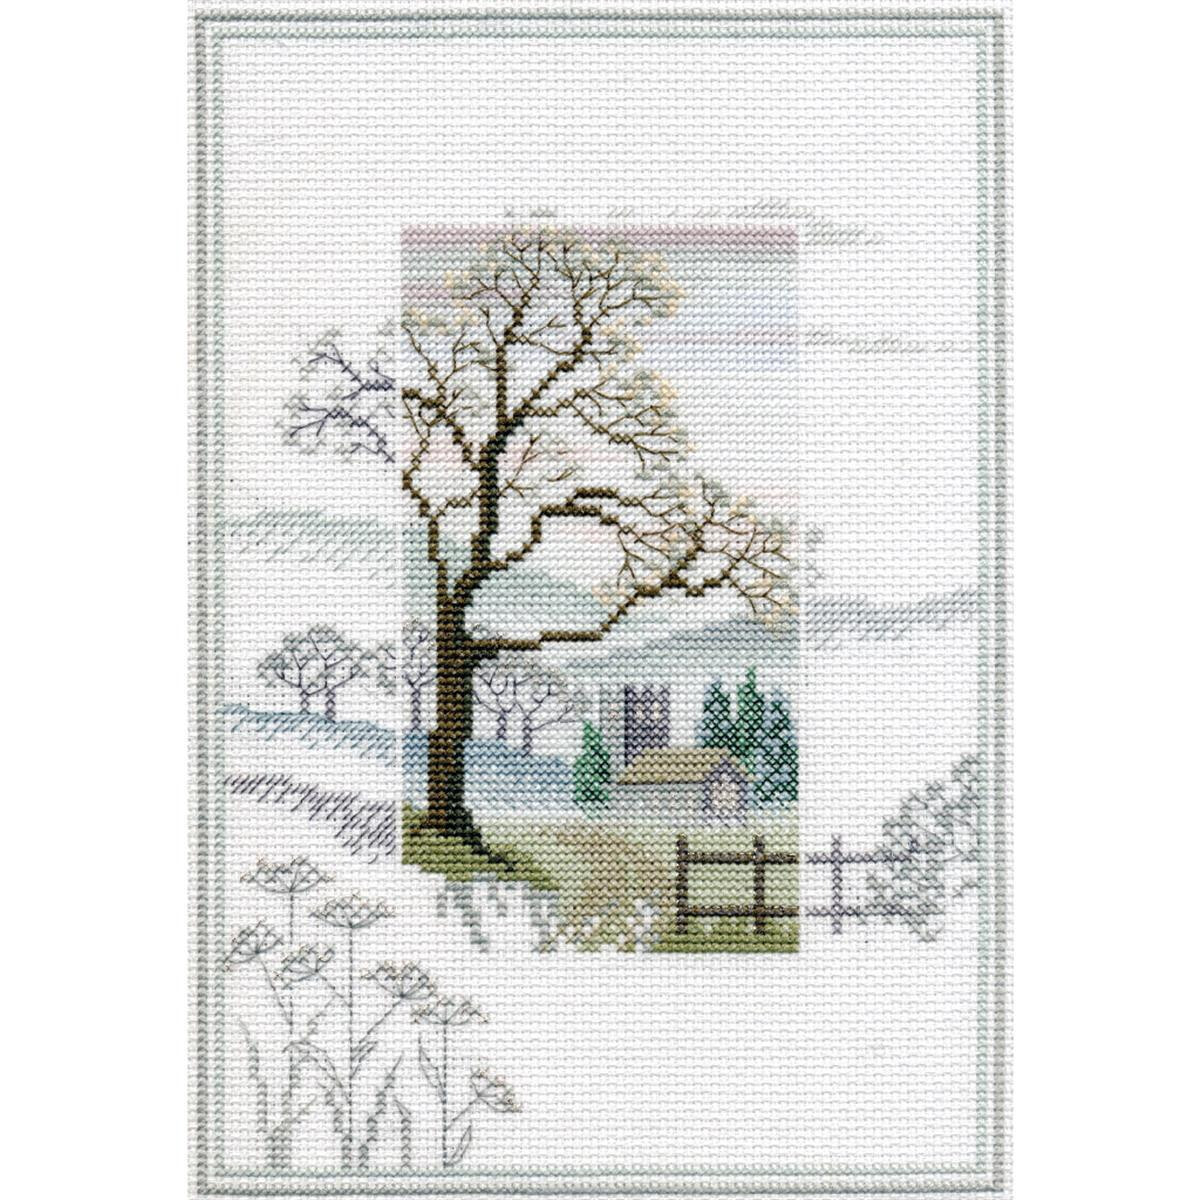 Bothy Threads counted cross stitch Kit "Misty...